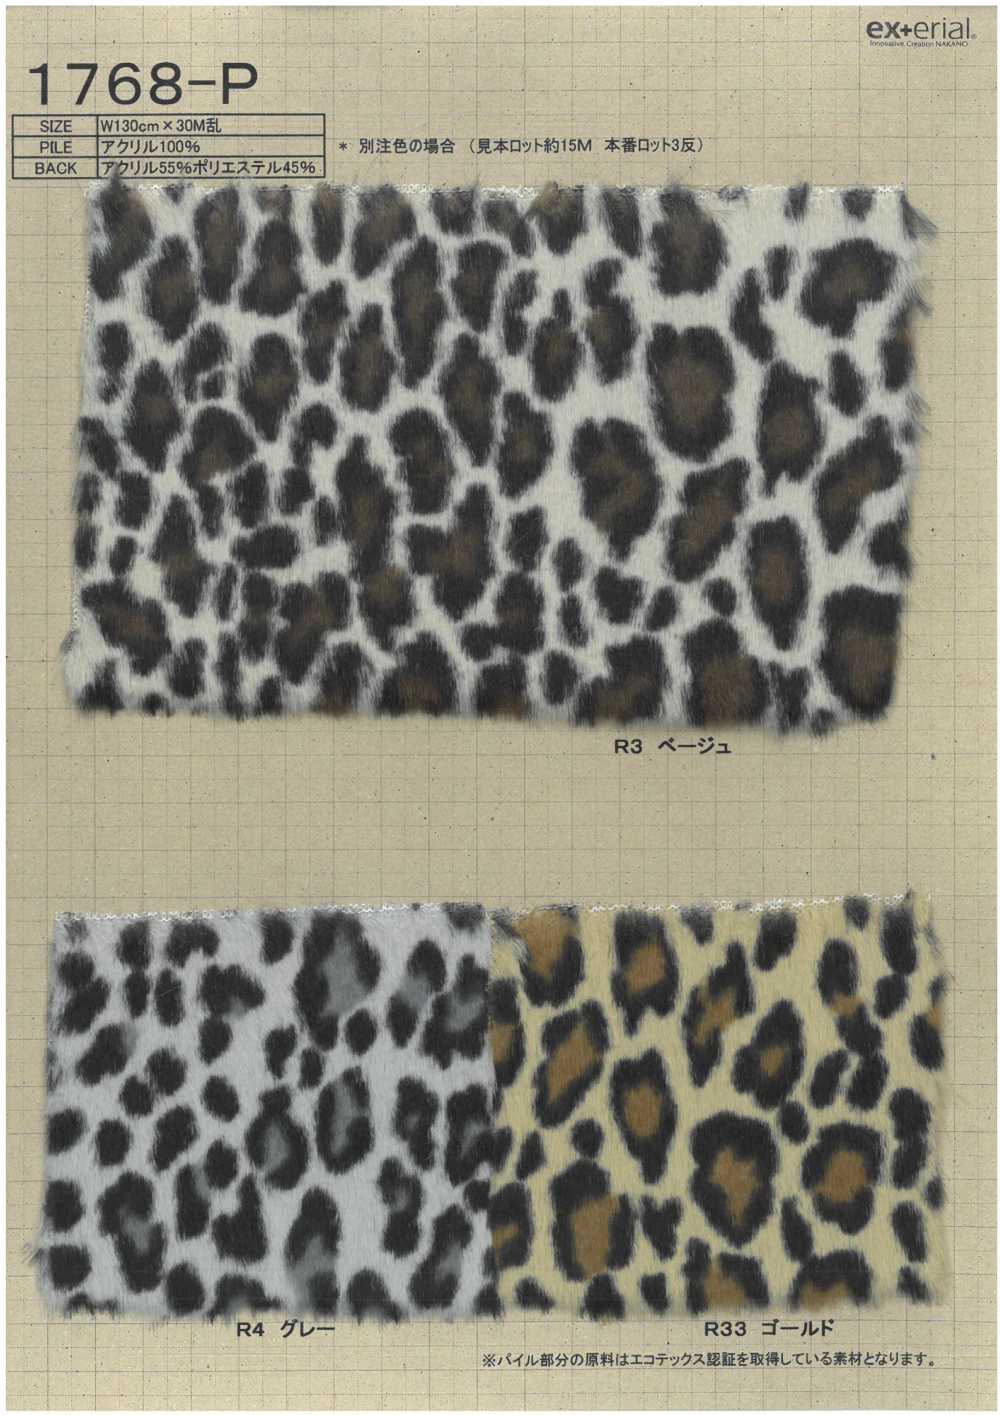 1768-P Craft Fur [leopard][Textile / Fabric] Nakano Stockinette Industry